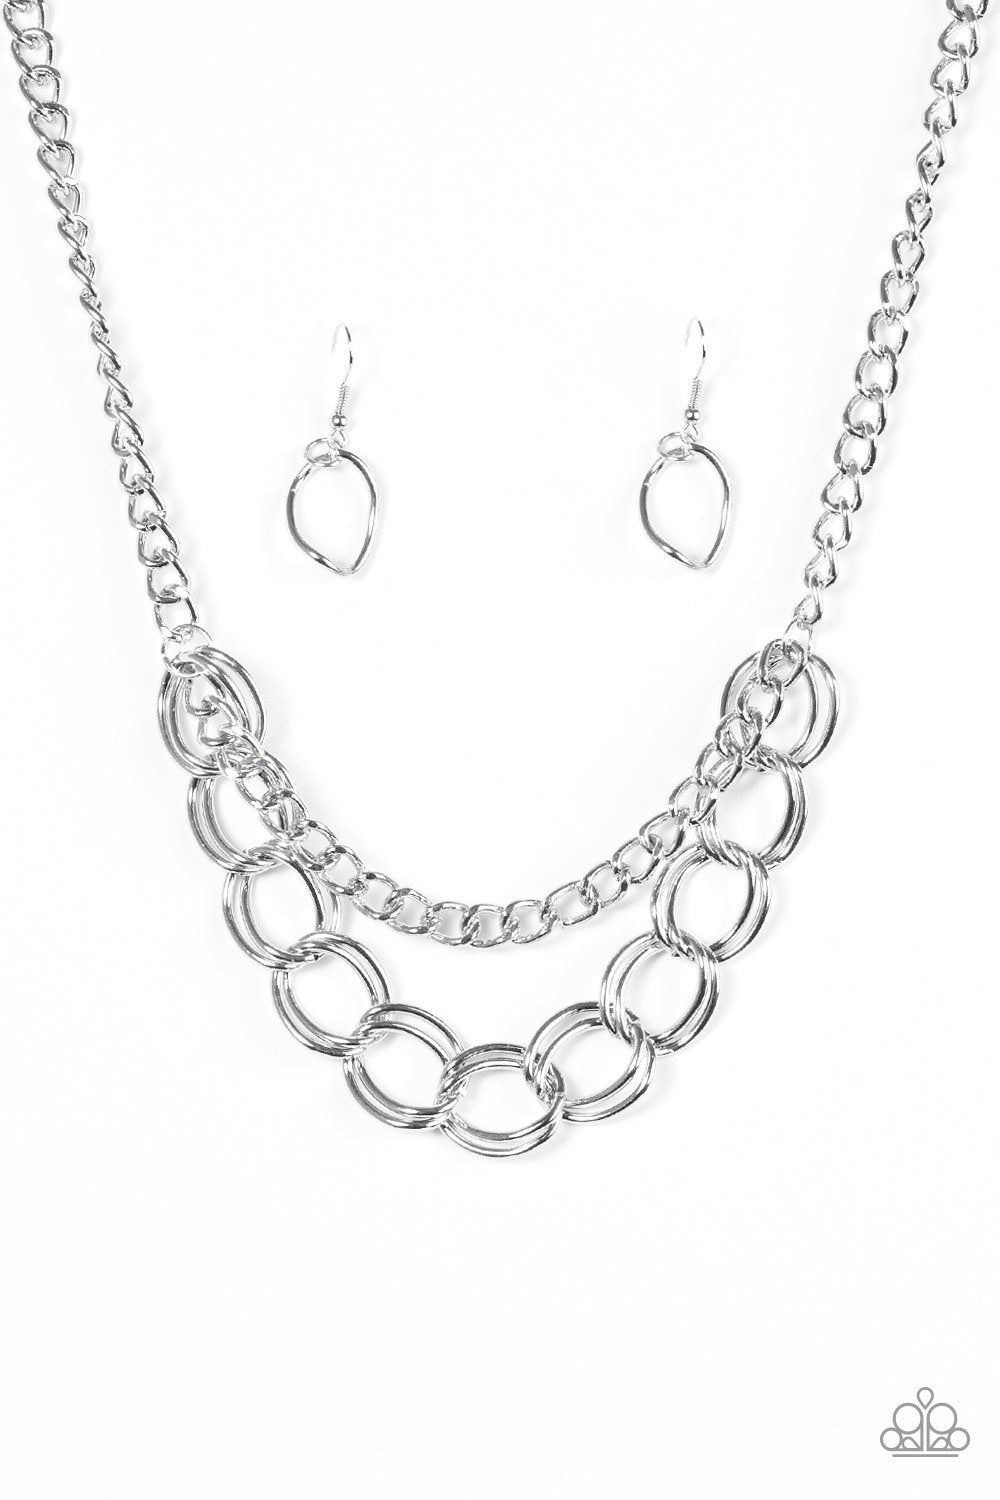 Top Boss Silver Chain Necklace - Paparazzi Accessories-CarasShop.com - $5 Jewelry by Cara Jewels